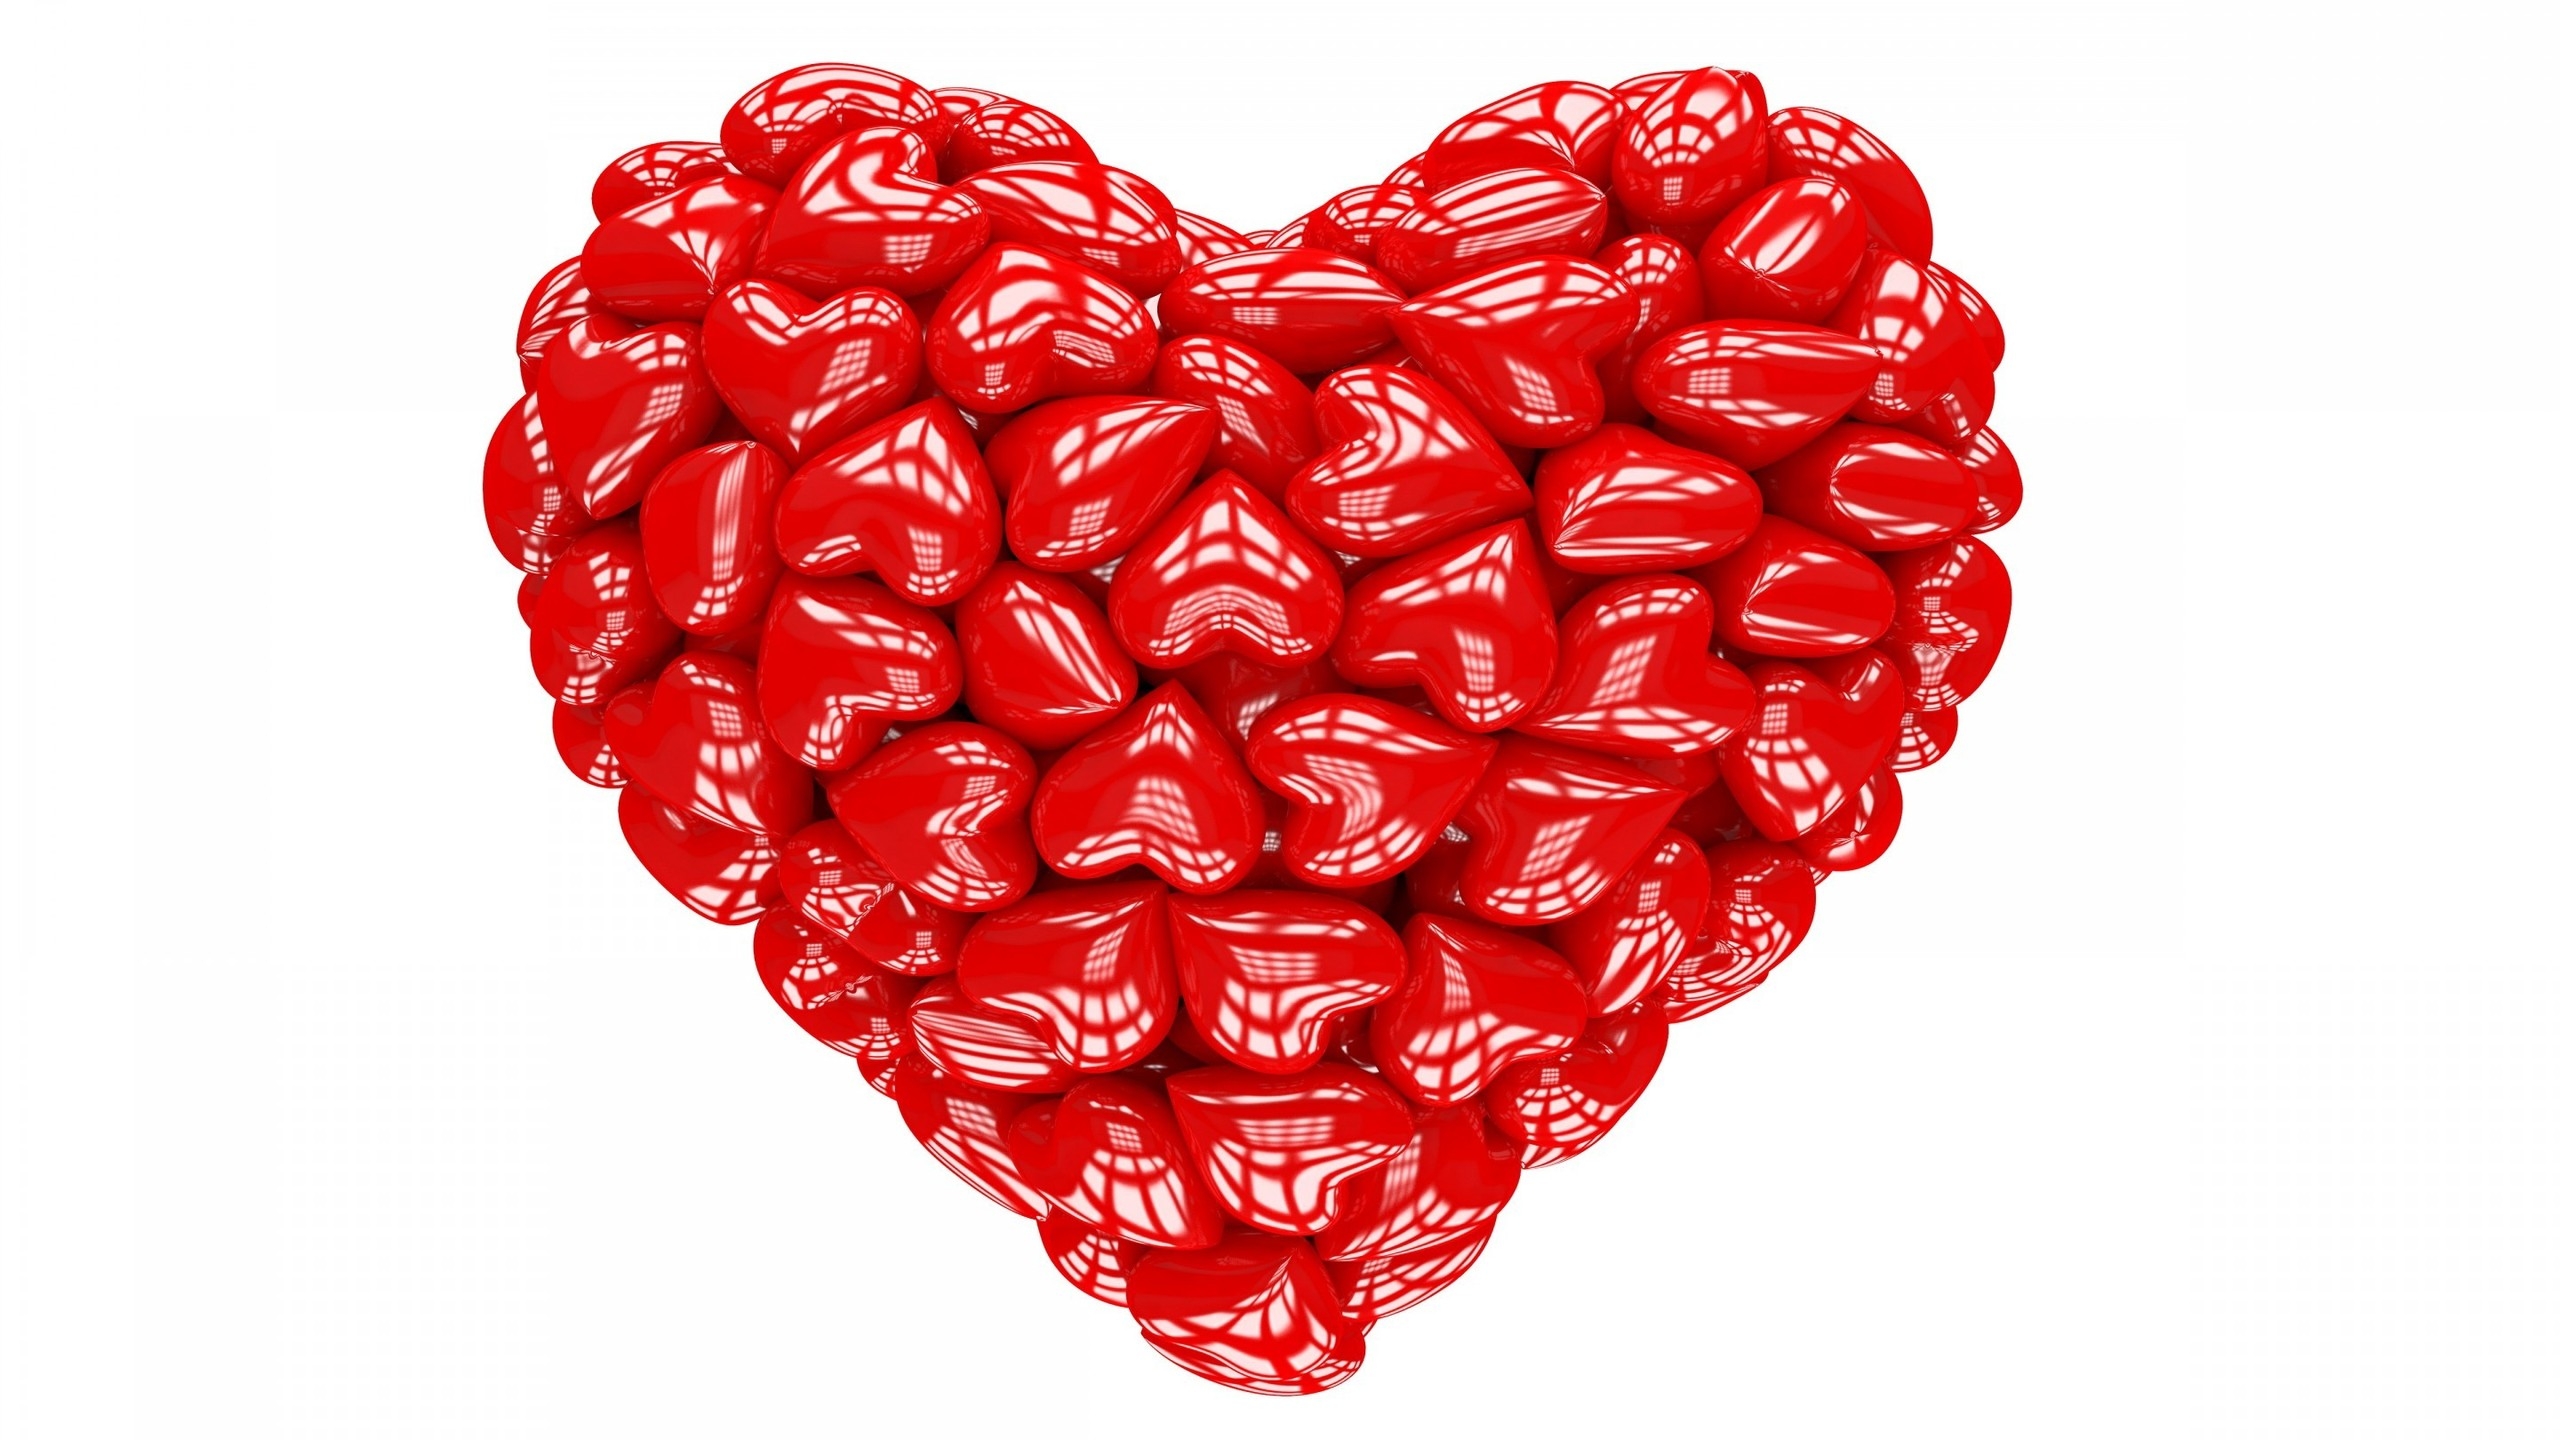 Red Heart 3D for 2560x1440 HDTV resolution